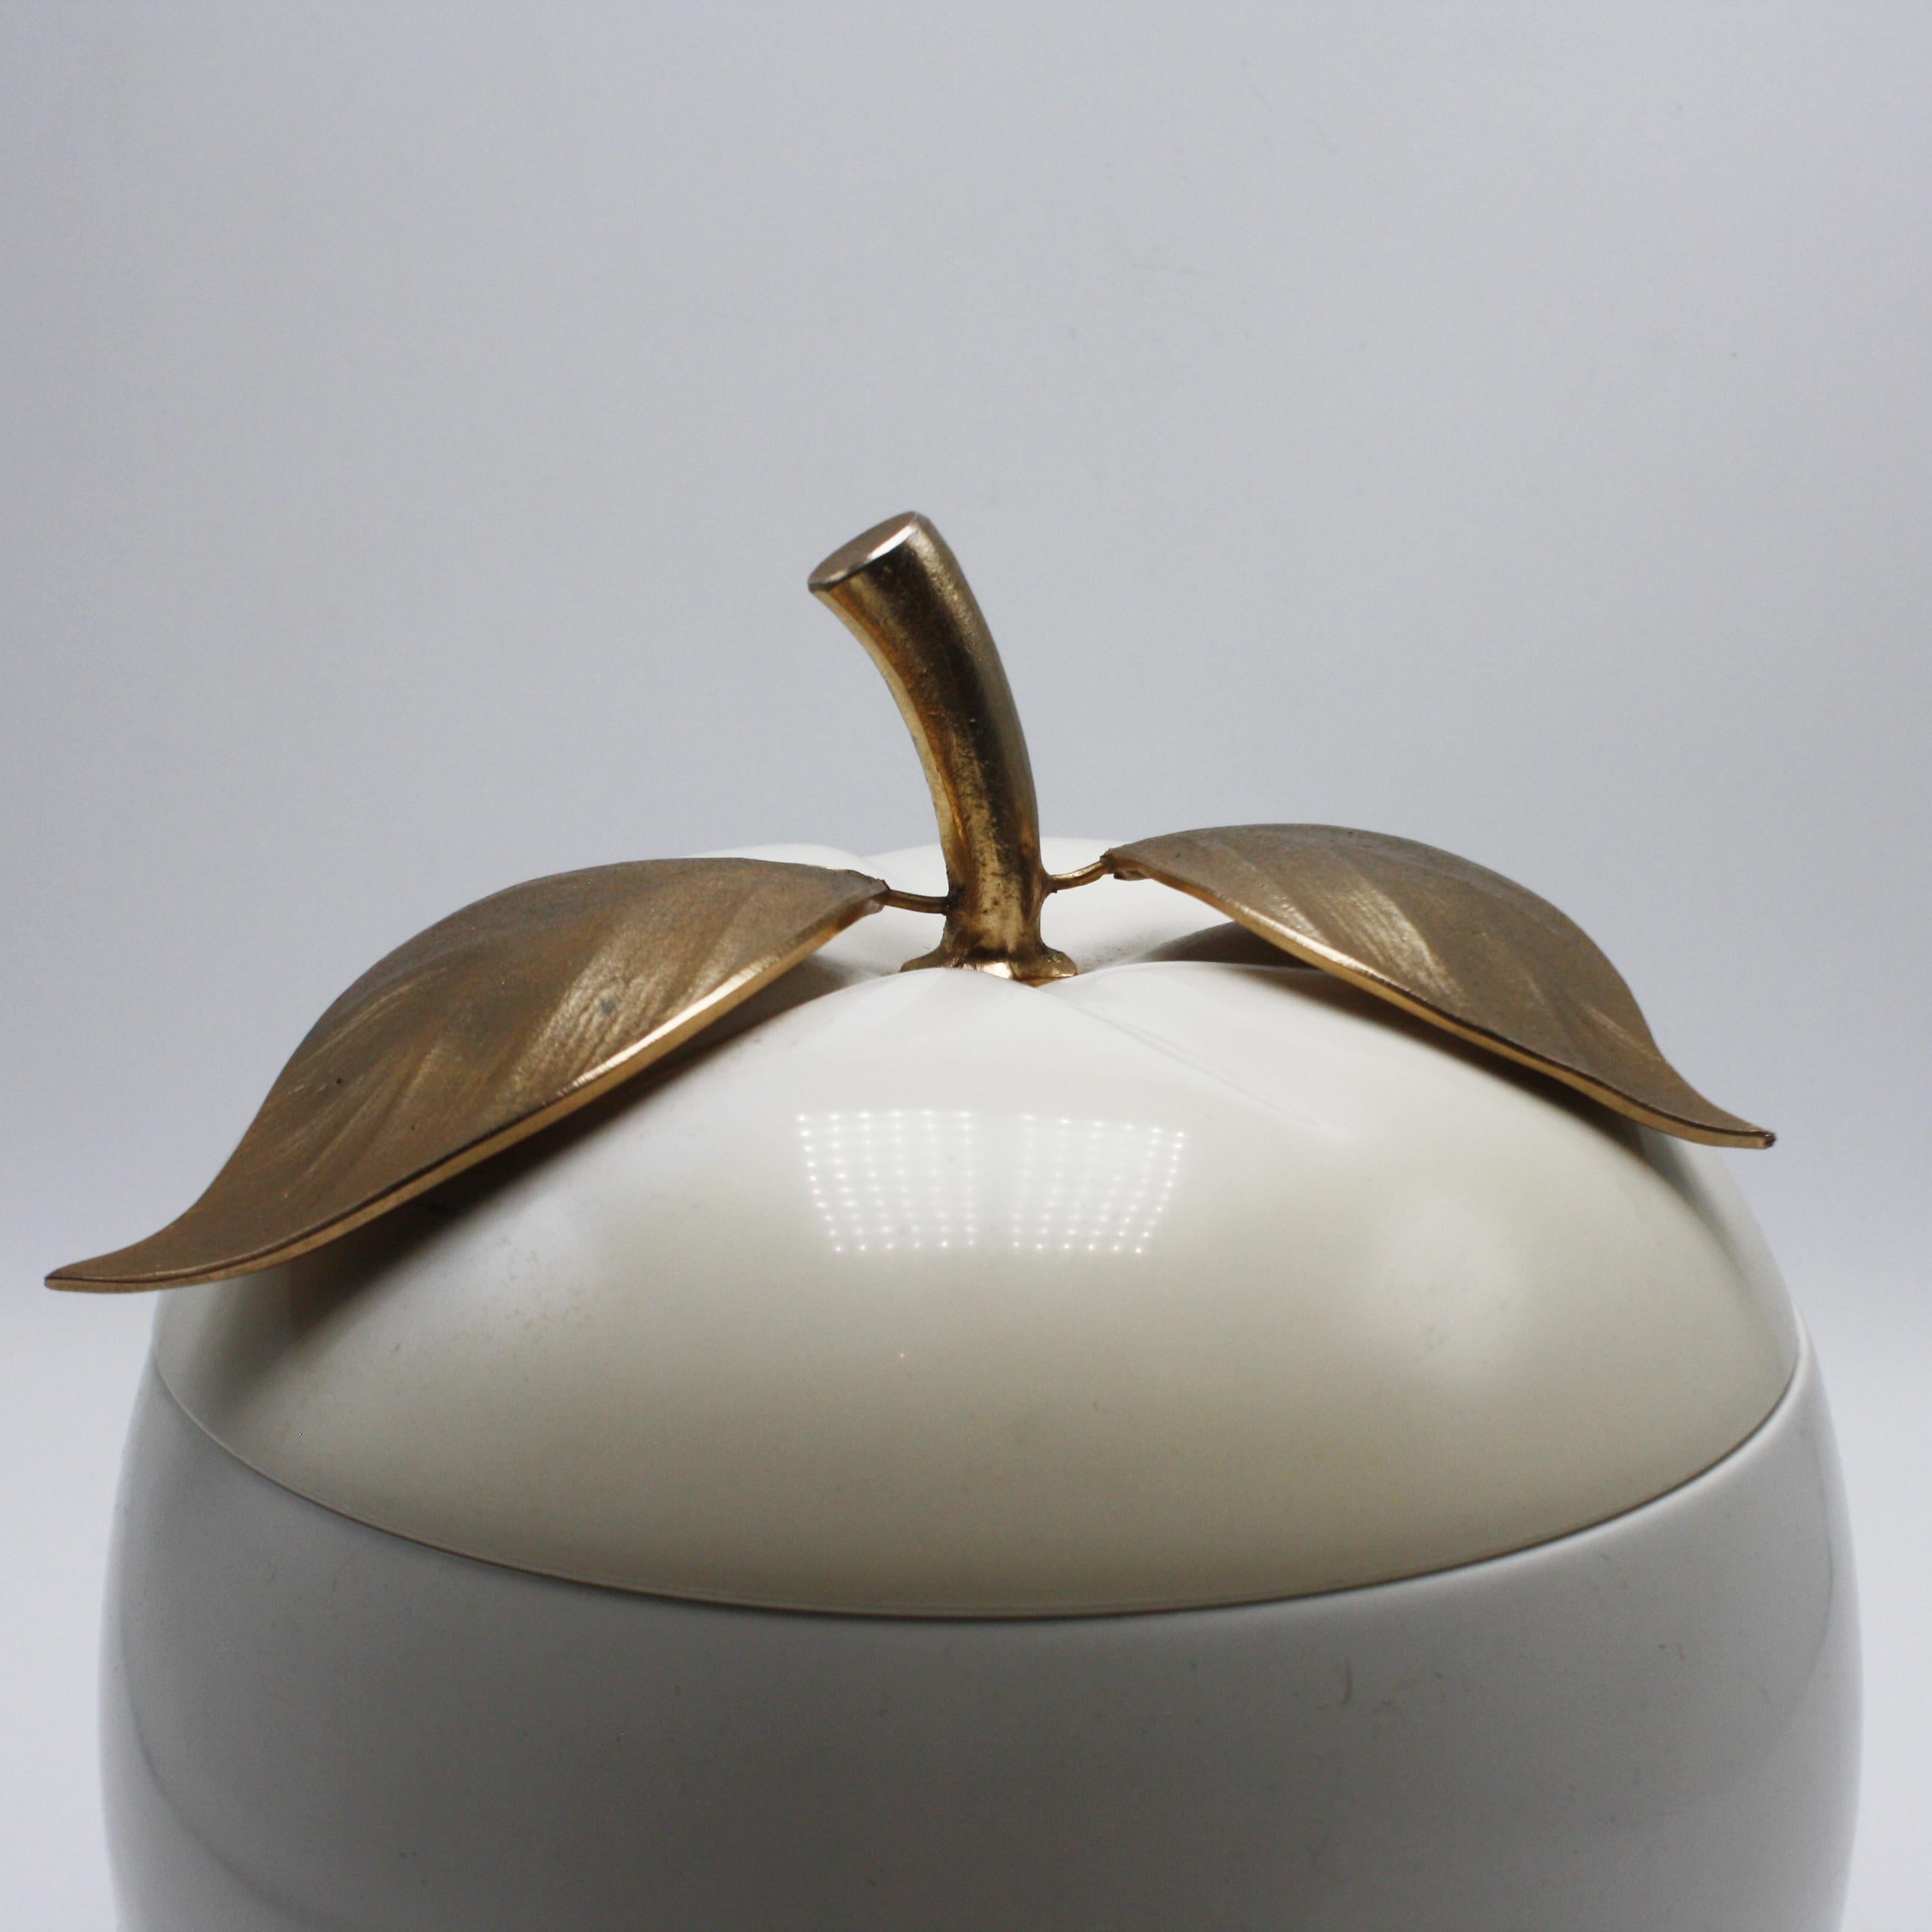 English Freddotherm Apple Ice Bucket Gold-Plated by Hans Turnwald, circa 1960